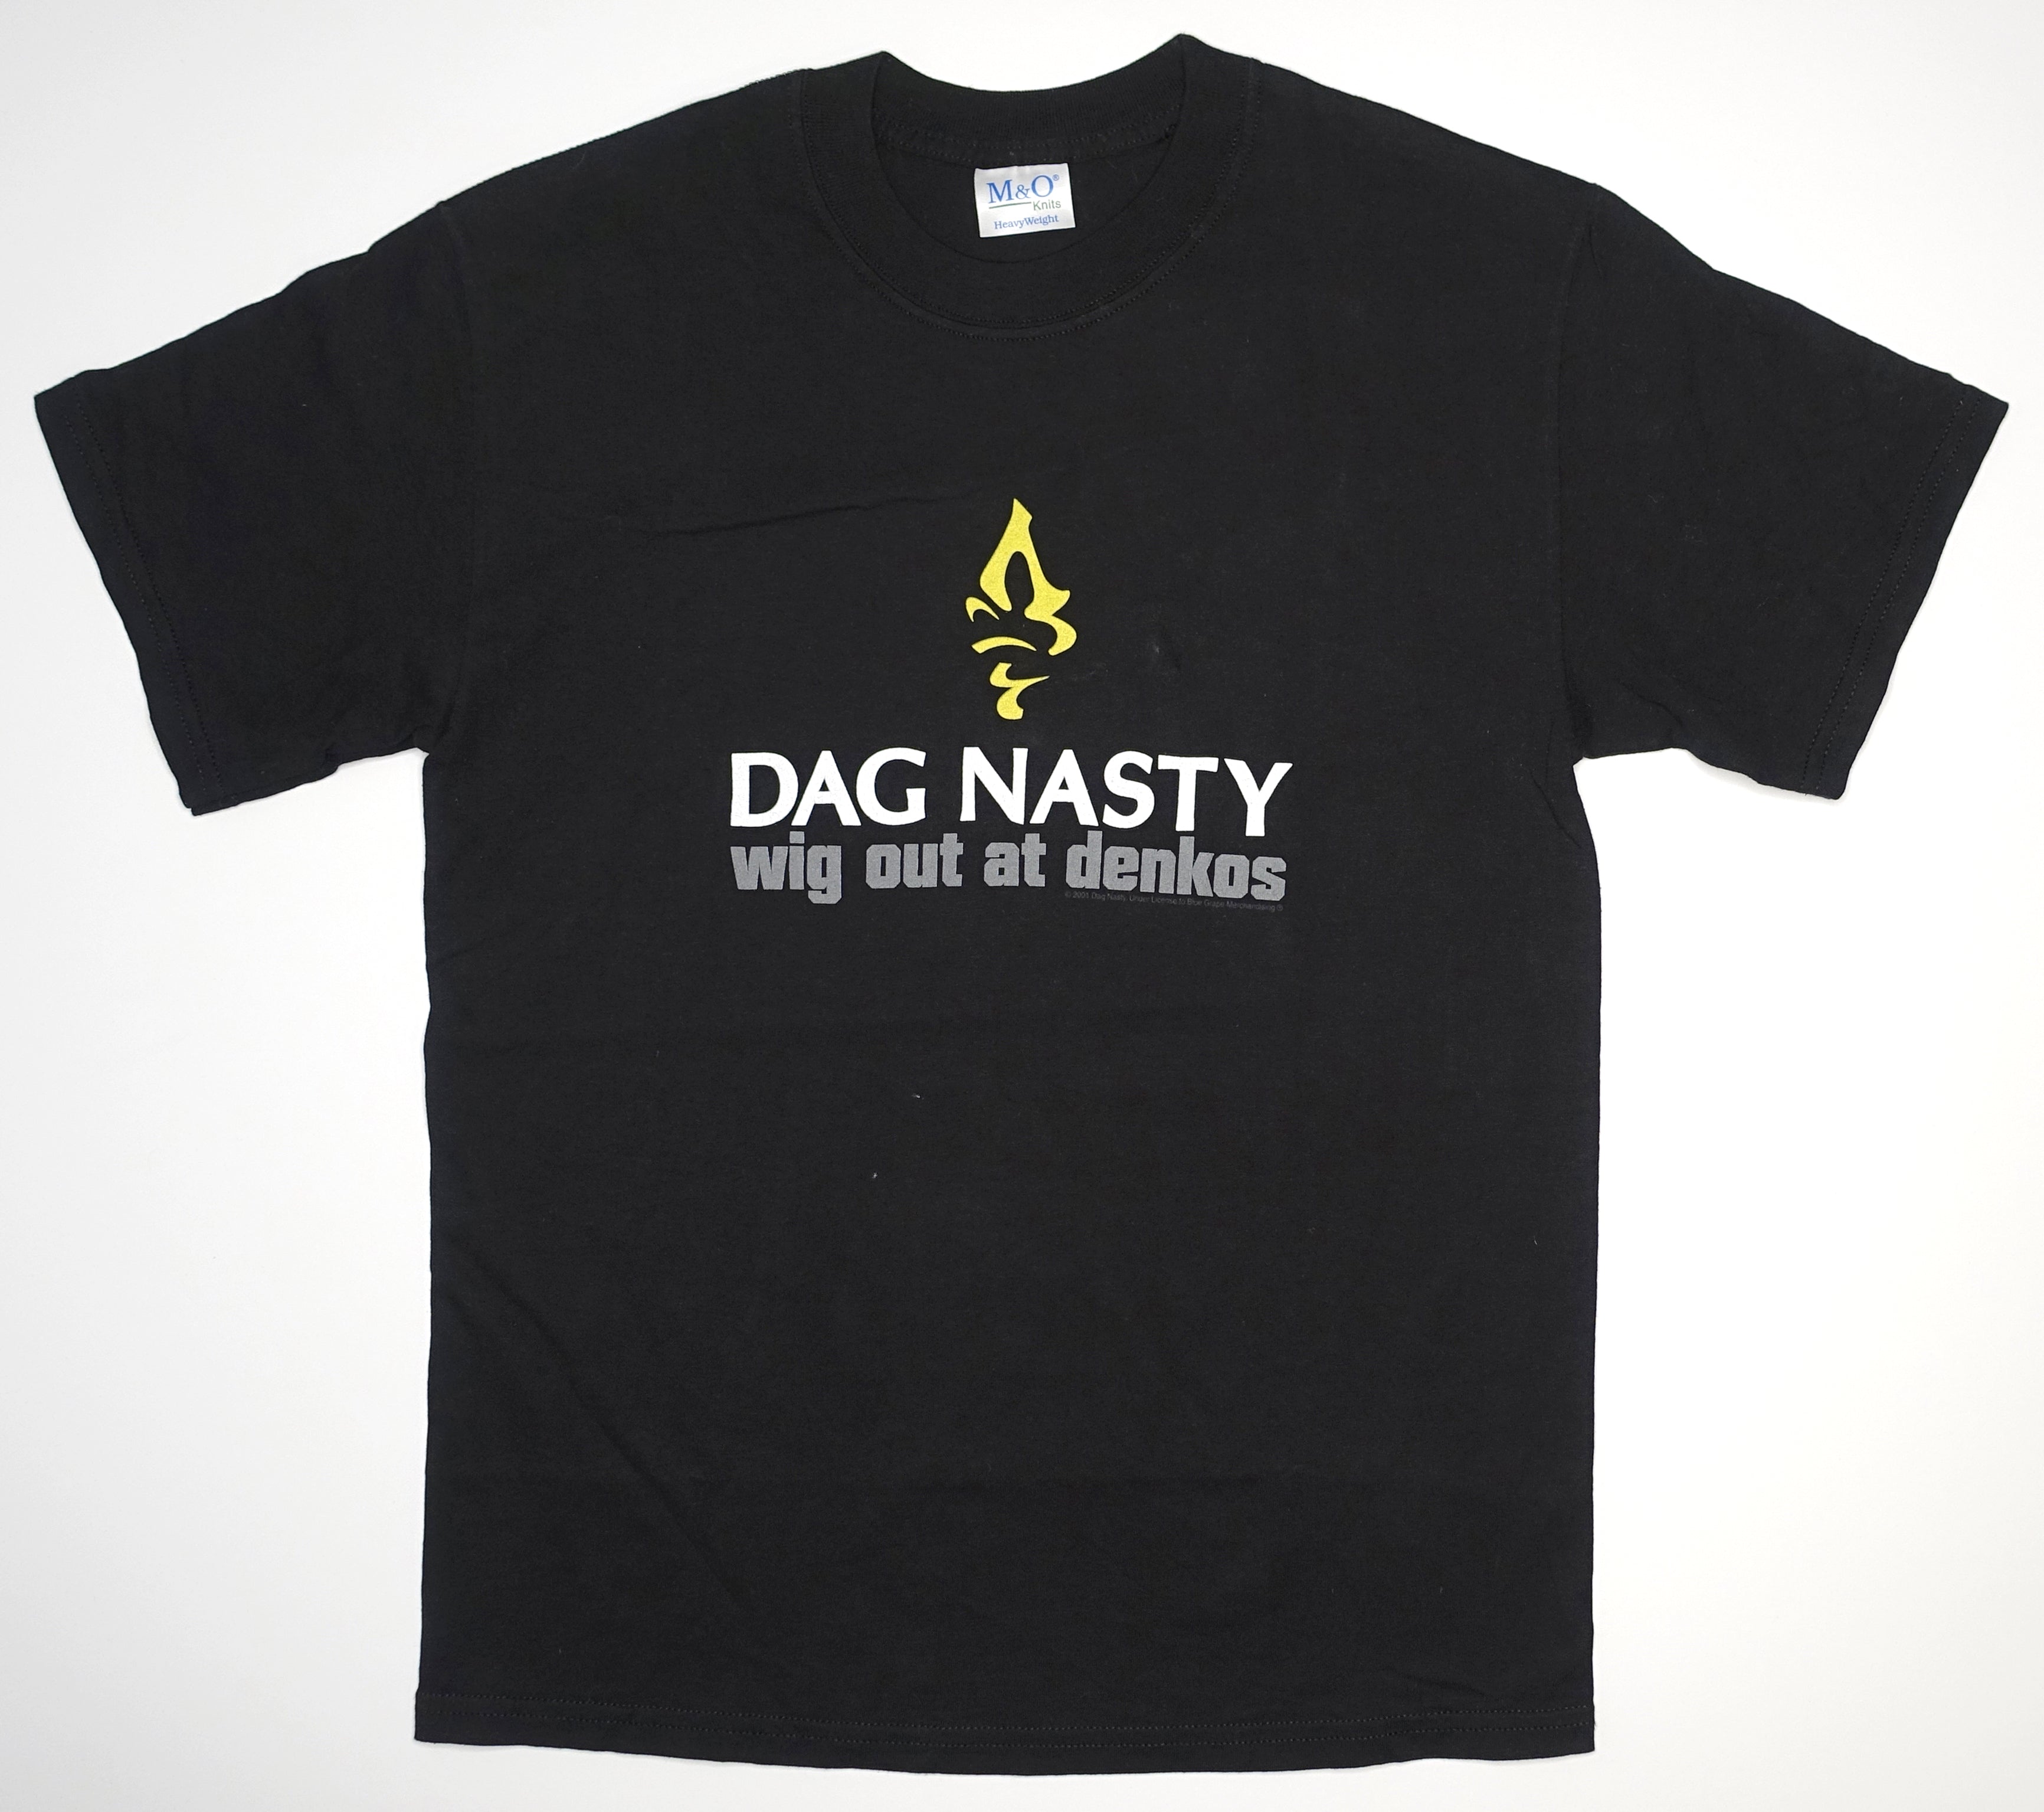 Dag Nasty - Wig Out At Denko's 2001 Tour Shirt Size Large